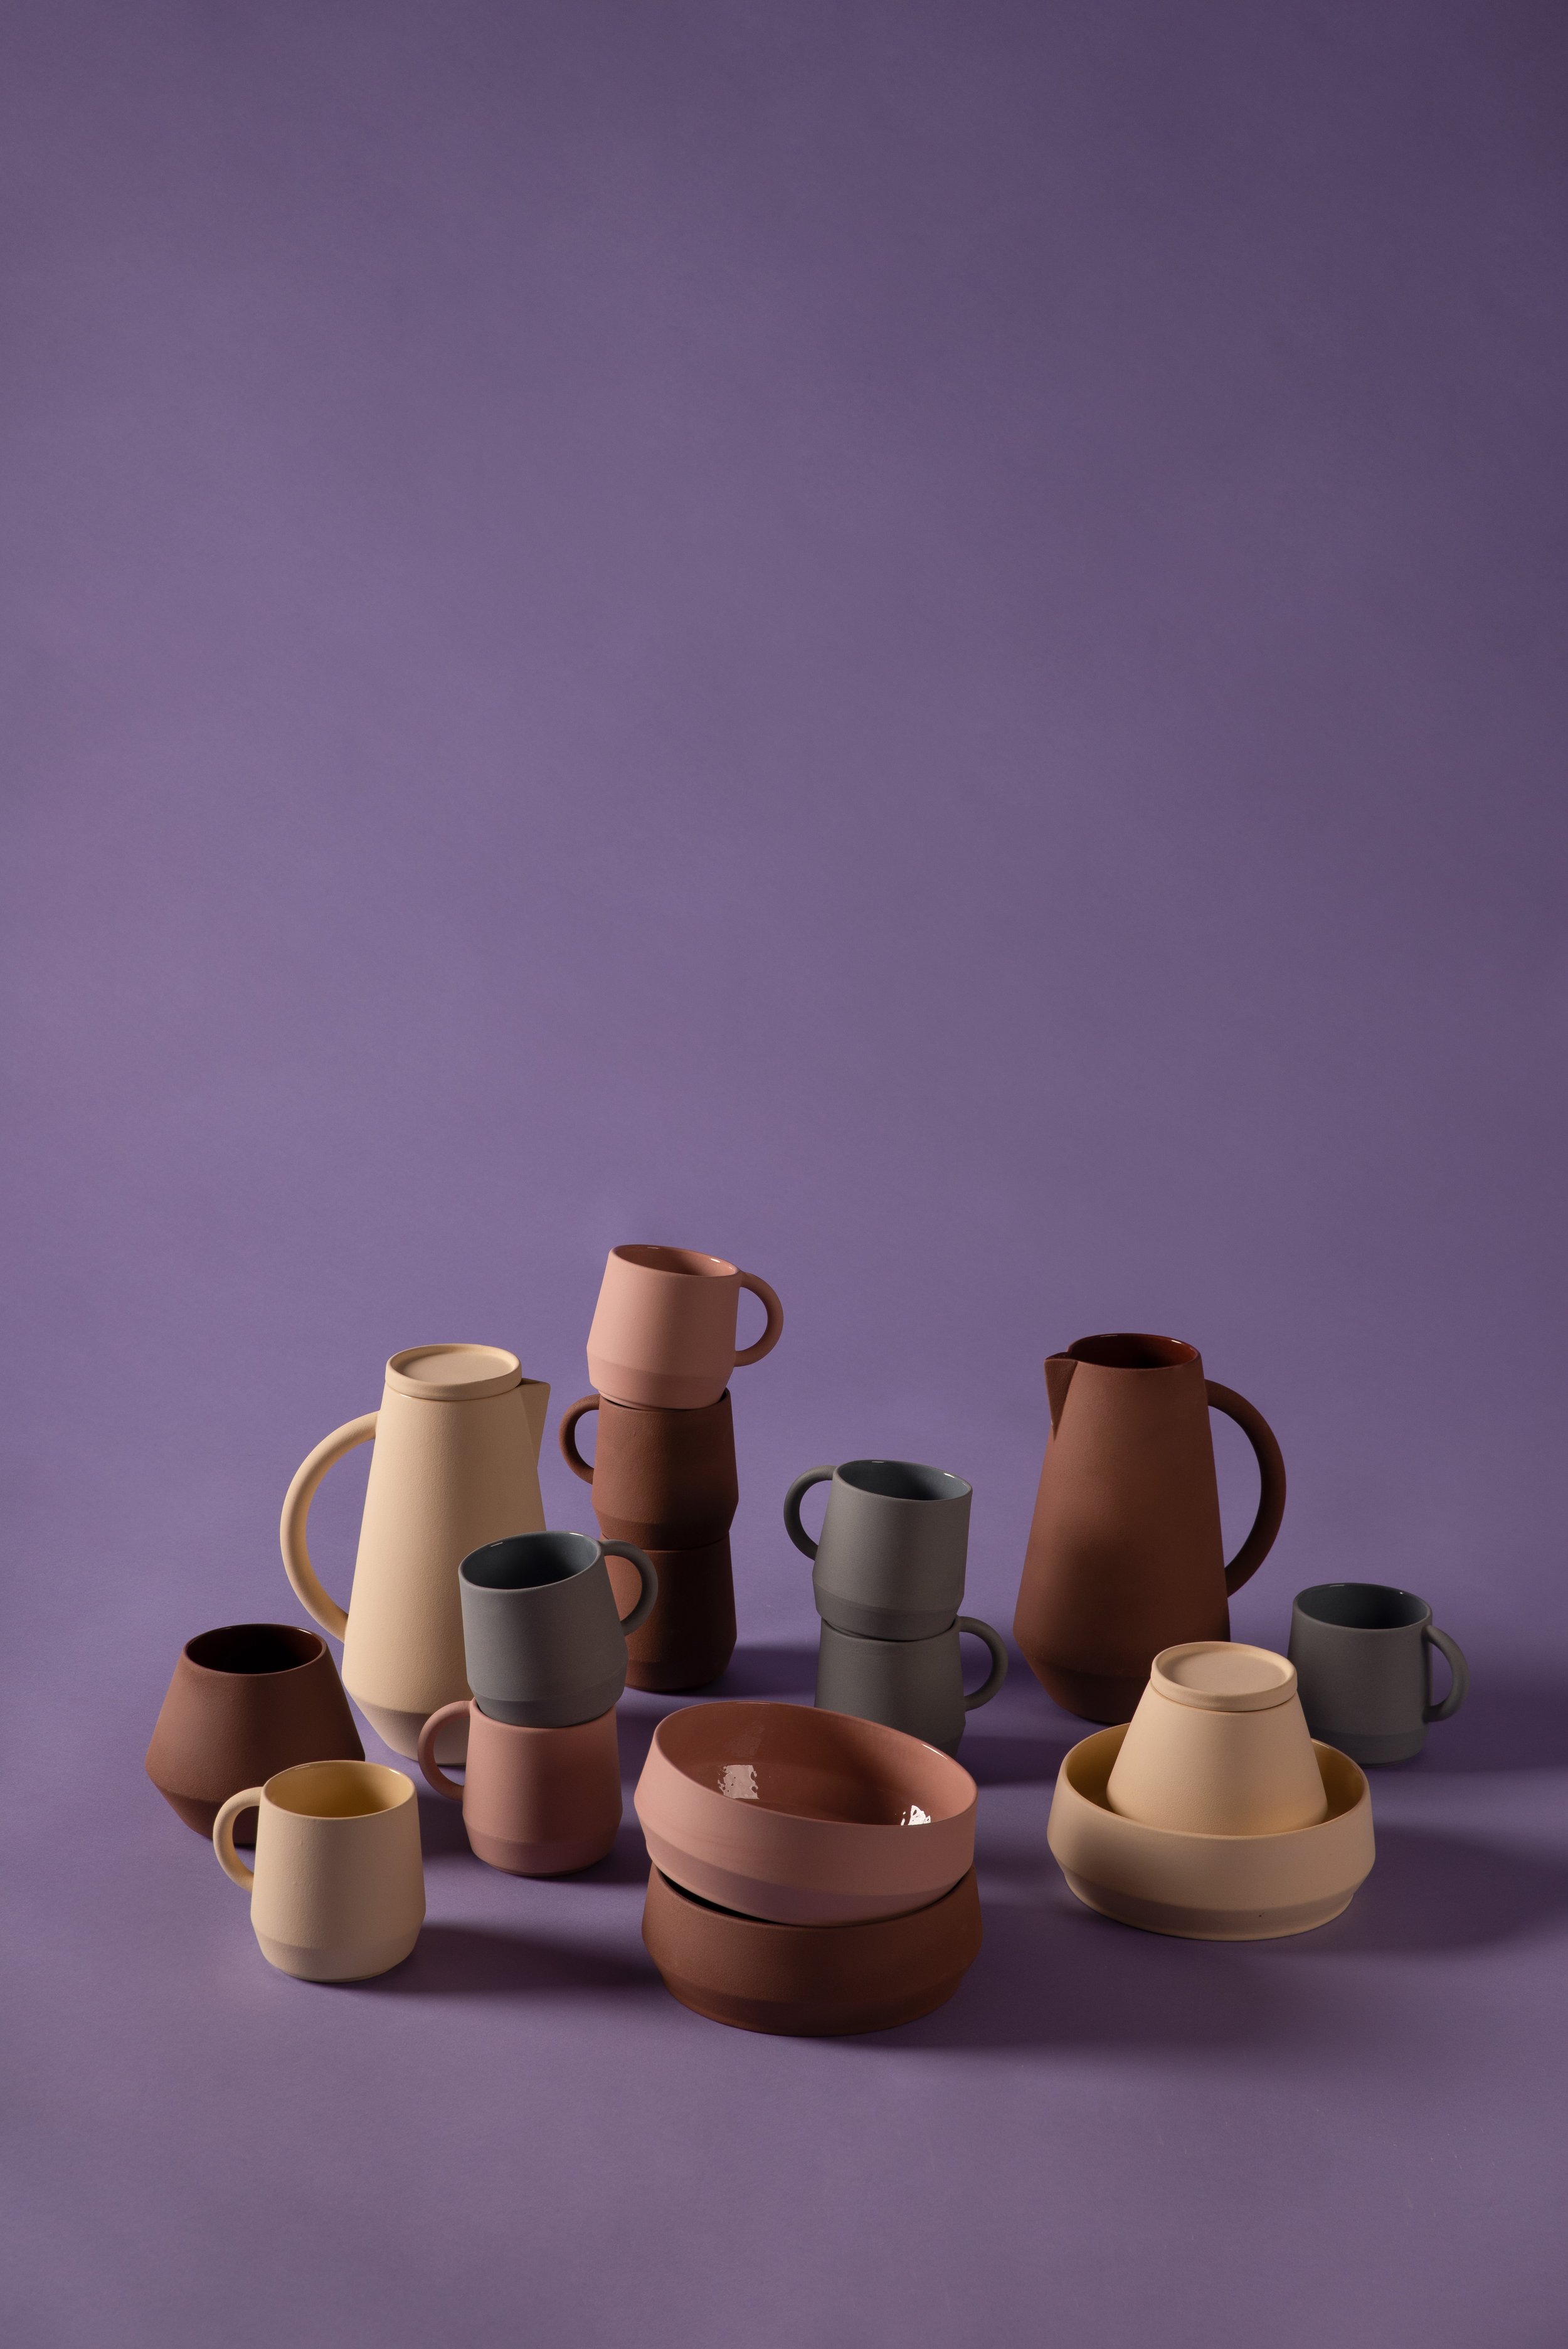 2021_UNISON_CERAMIC_COLLECTION_stacked.jpg